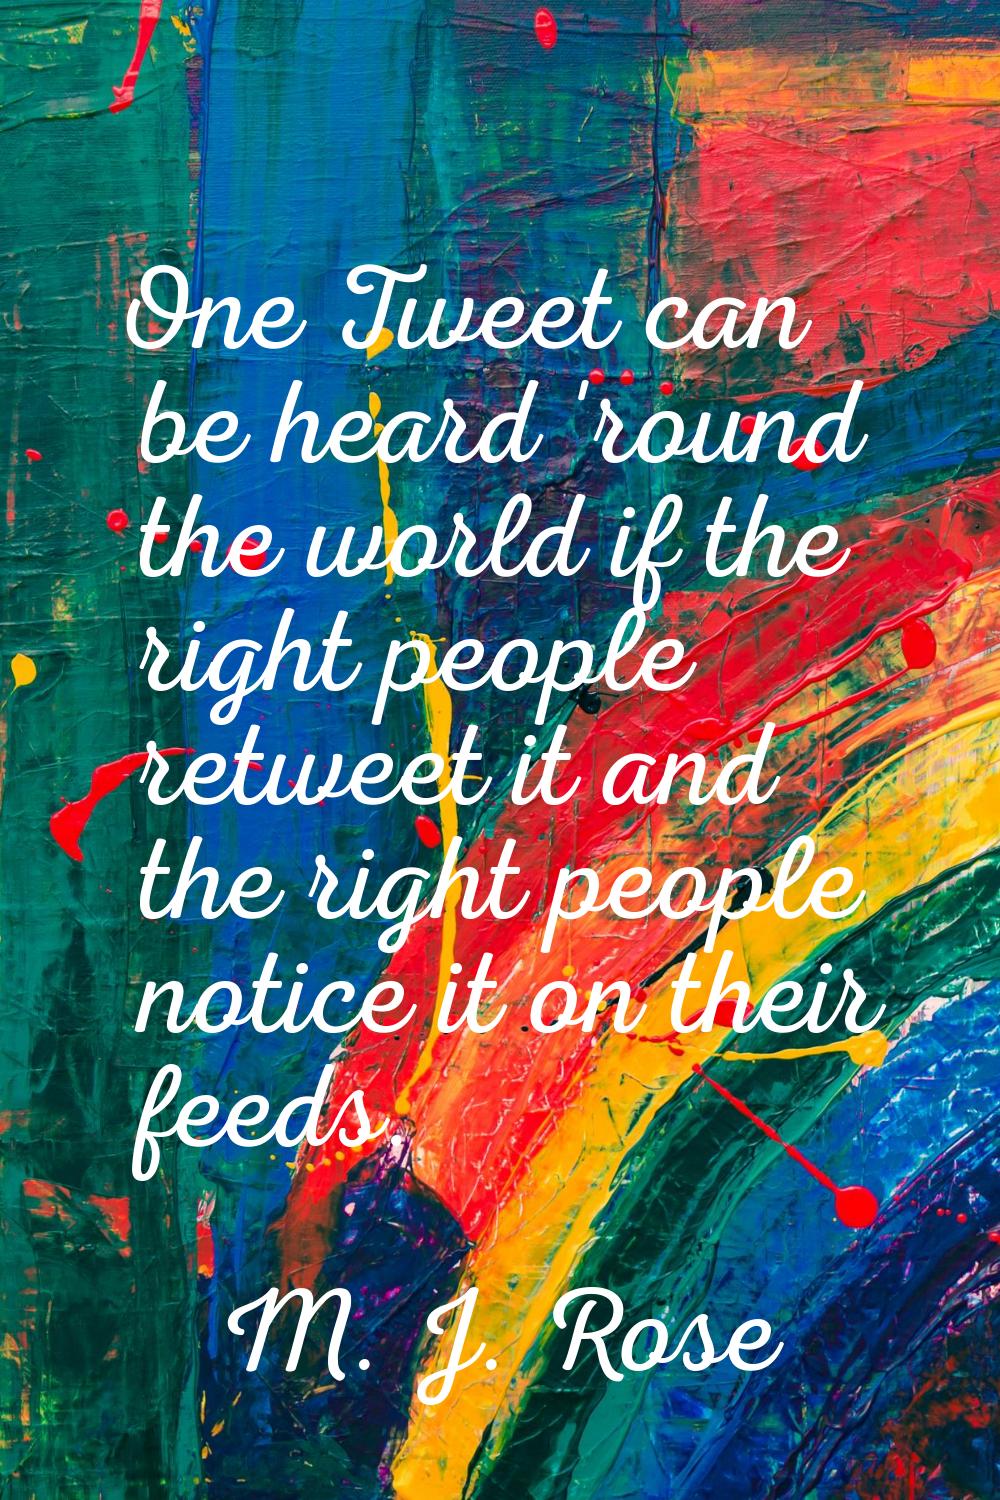 One Tweet can be heard 'round the world if the right people retweet it and the right people notice 